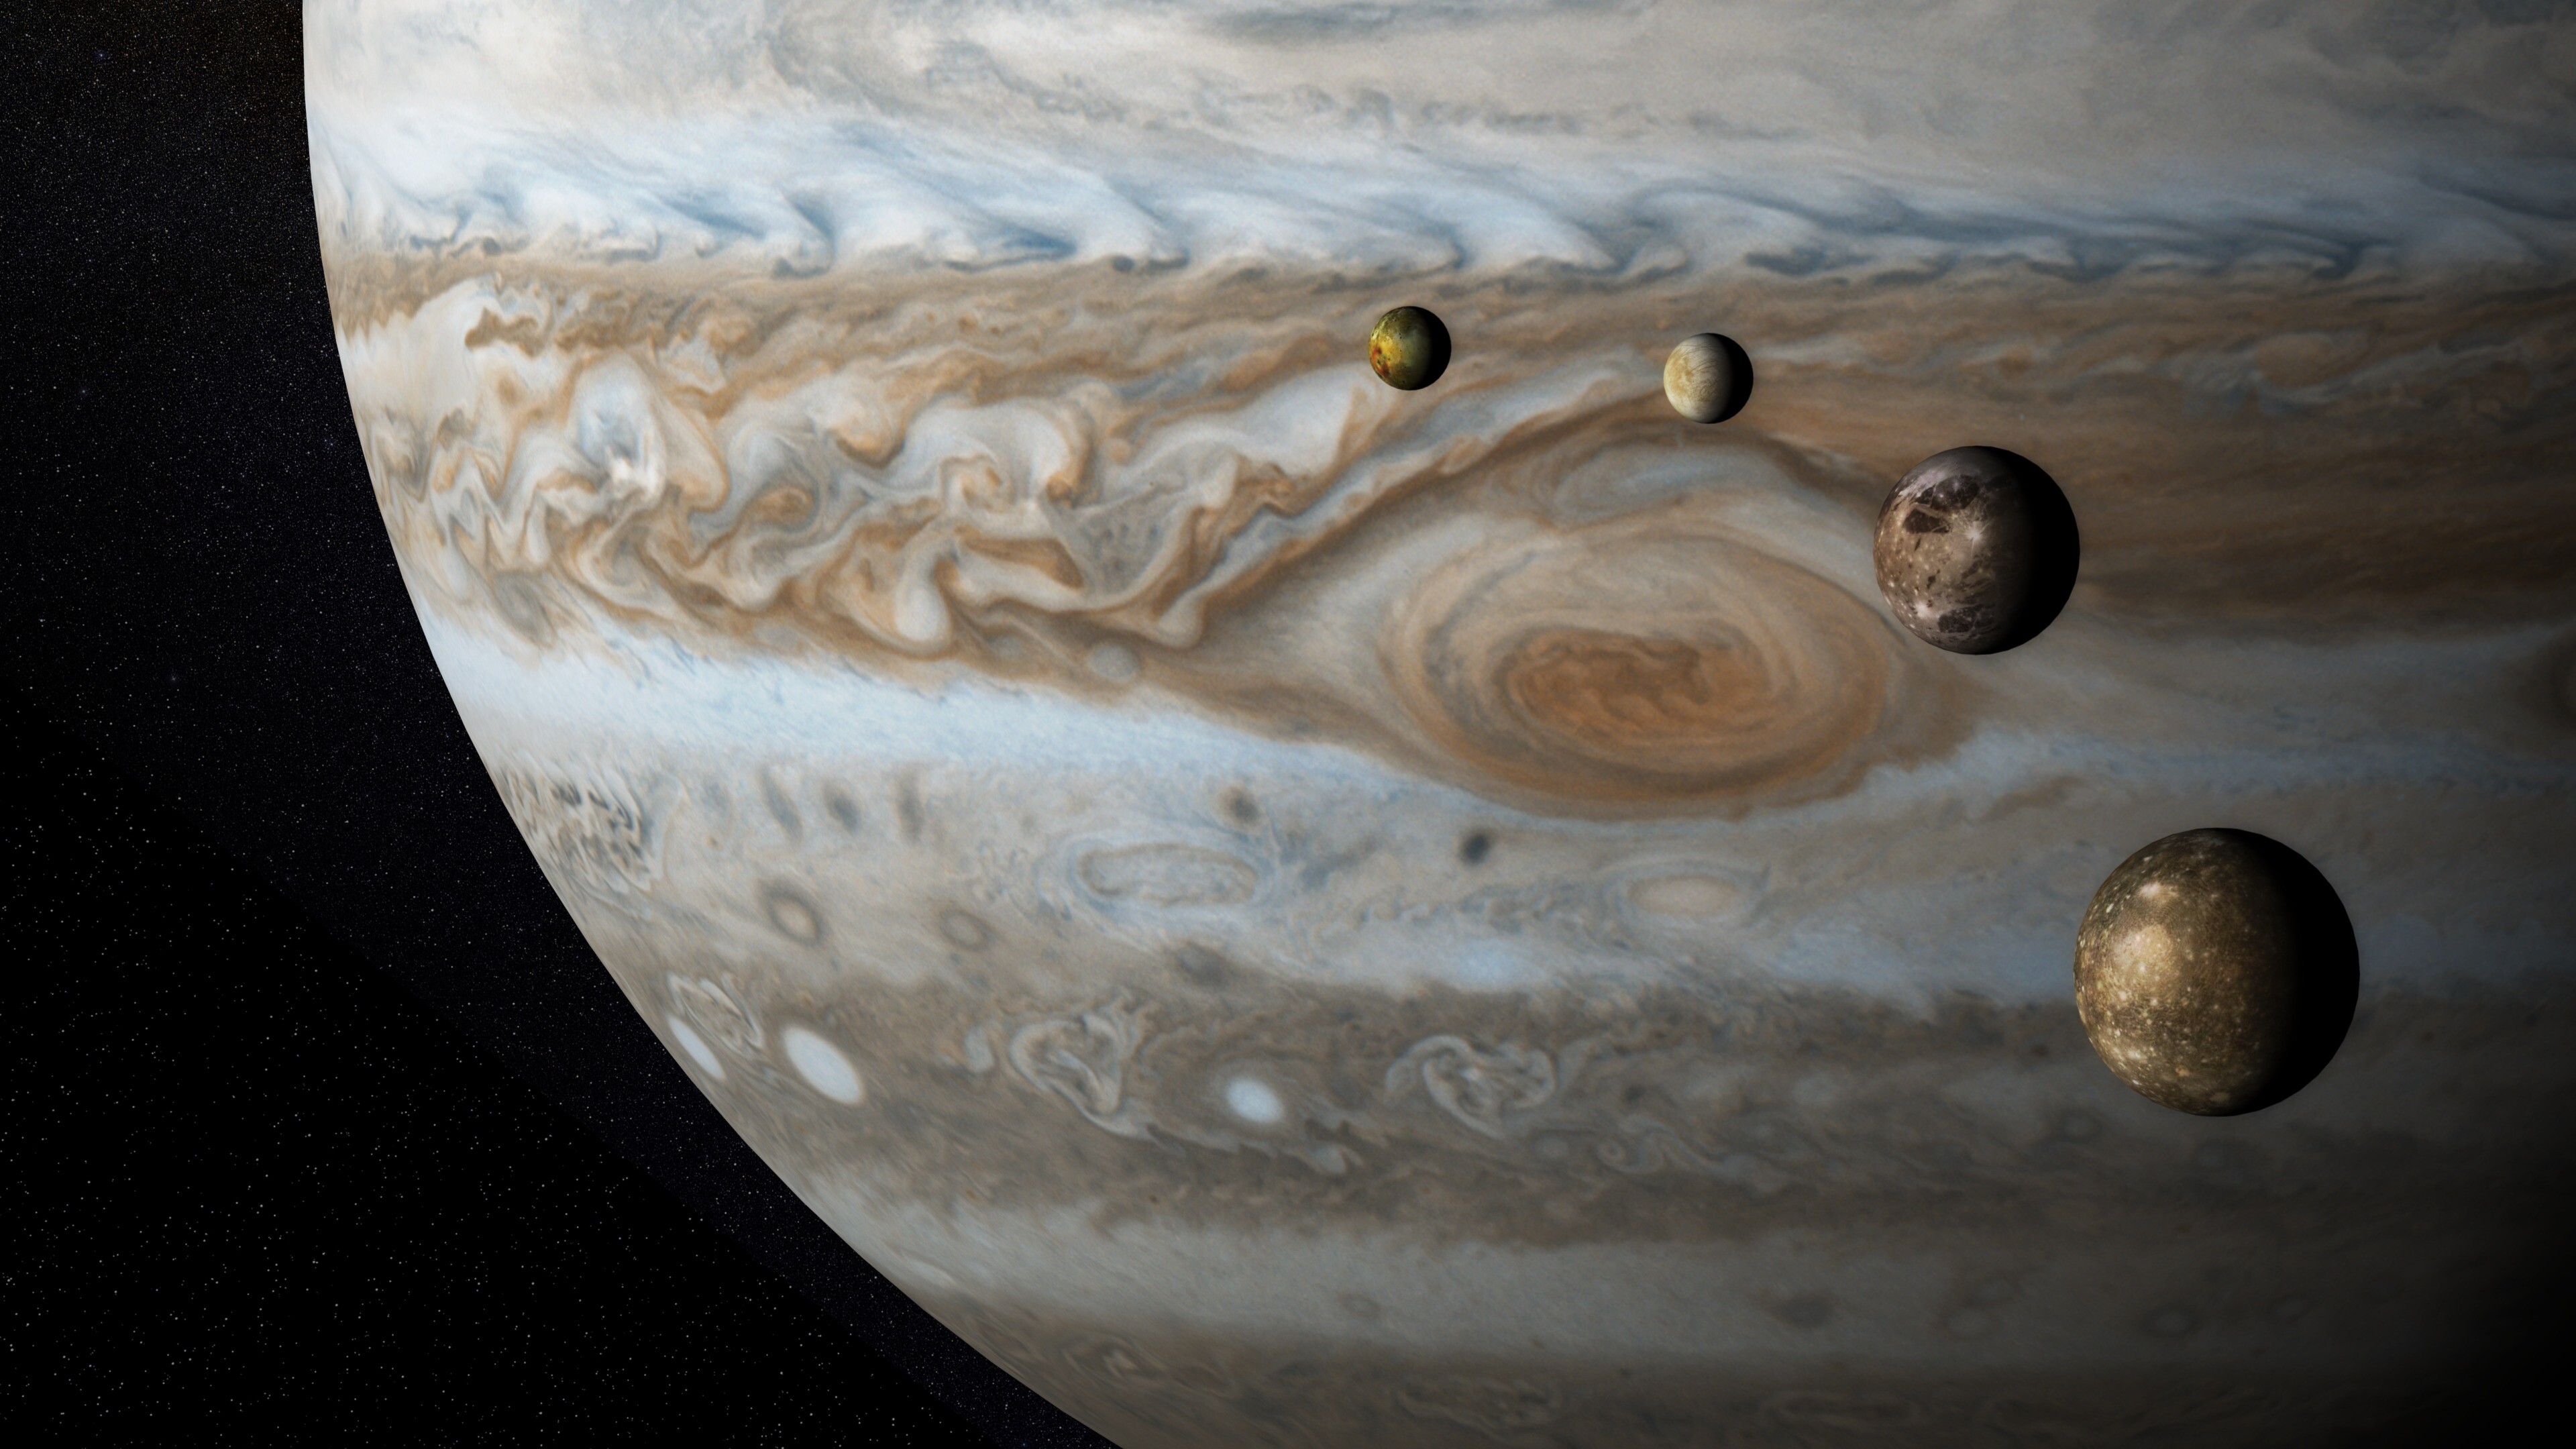 Jupiter: The planet has four large moons: Io, Europa, Ganymede, and Callisto. 3840x2160 4K Background.